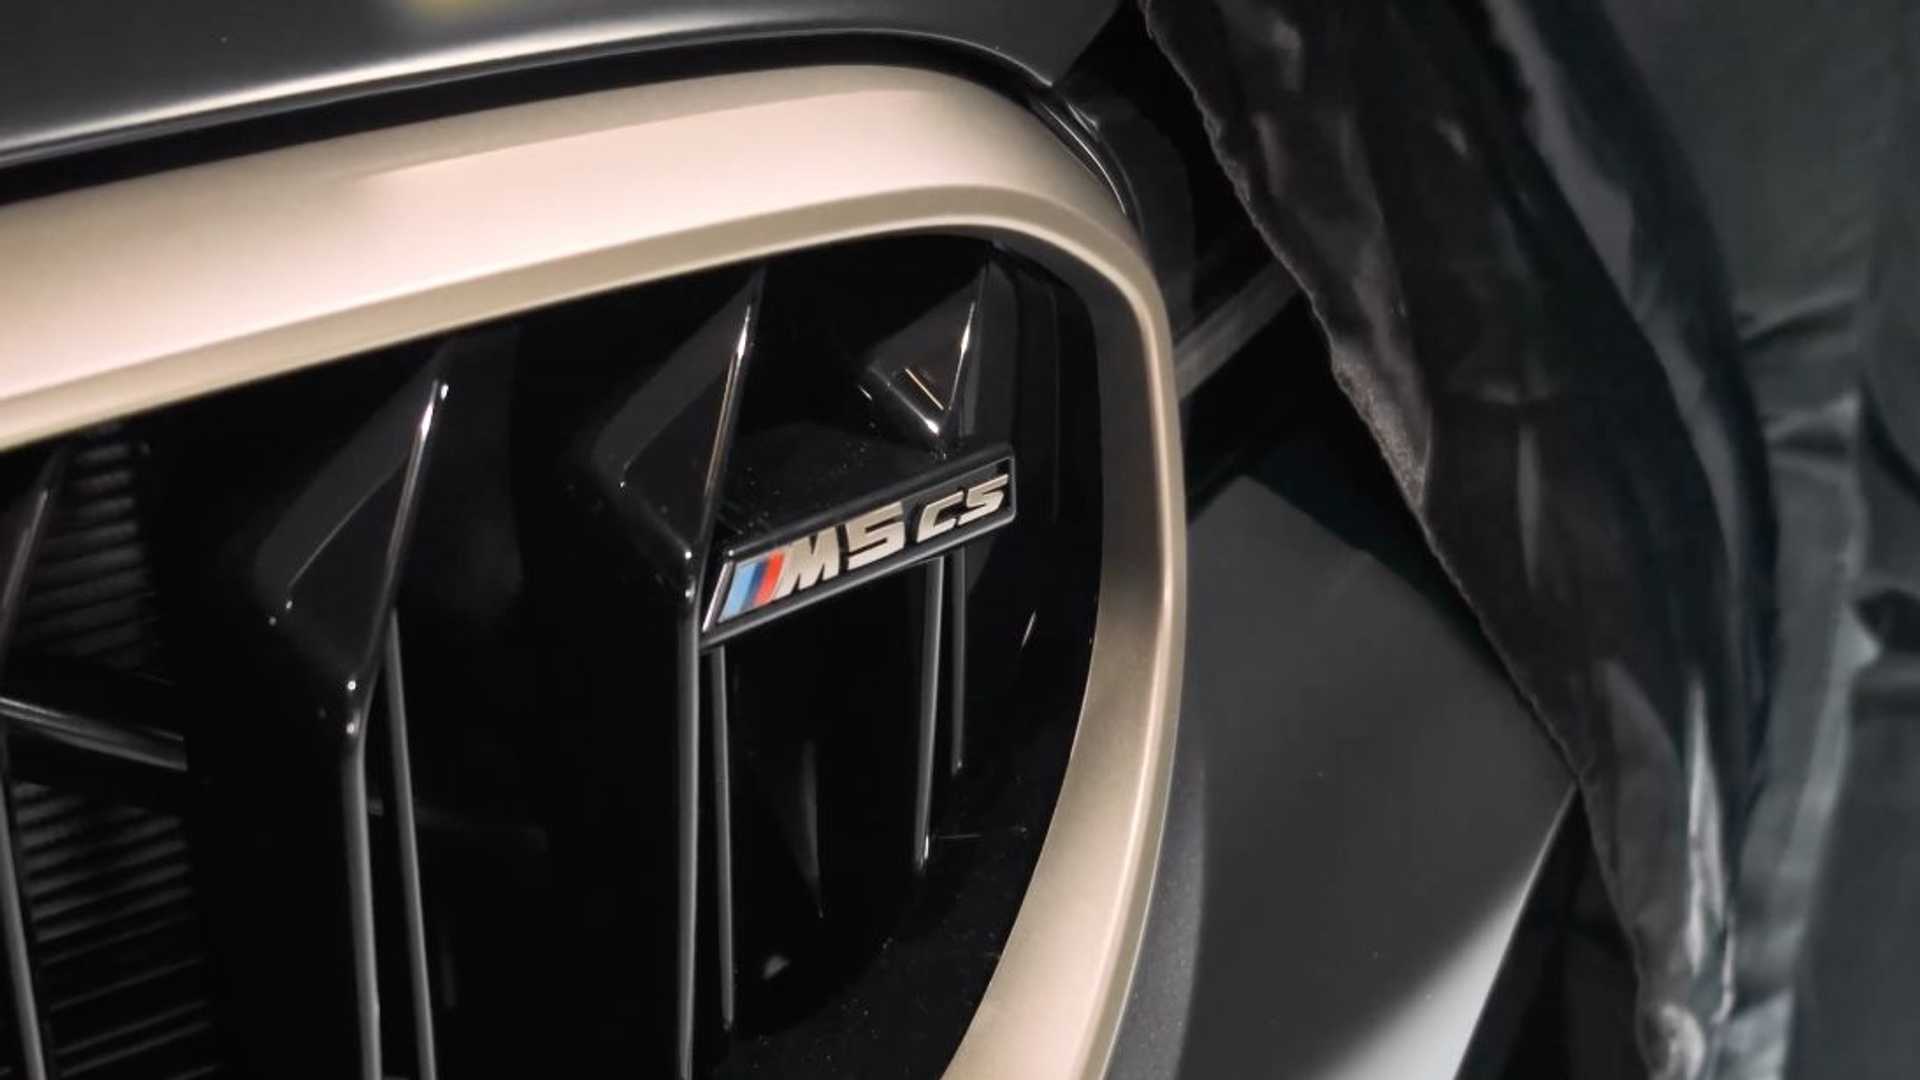 BMW unveils first details on M5 CS starting in January 2021